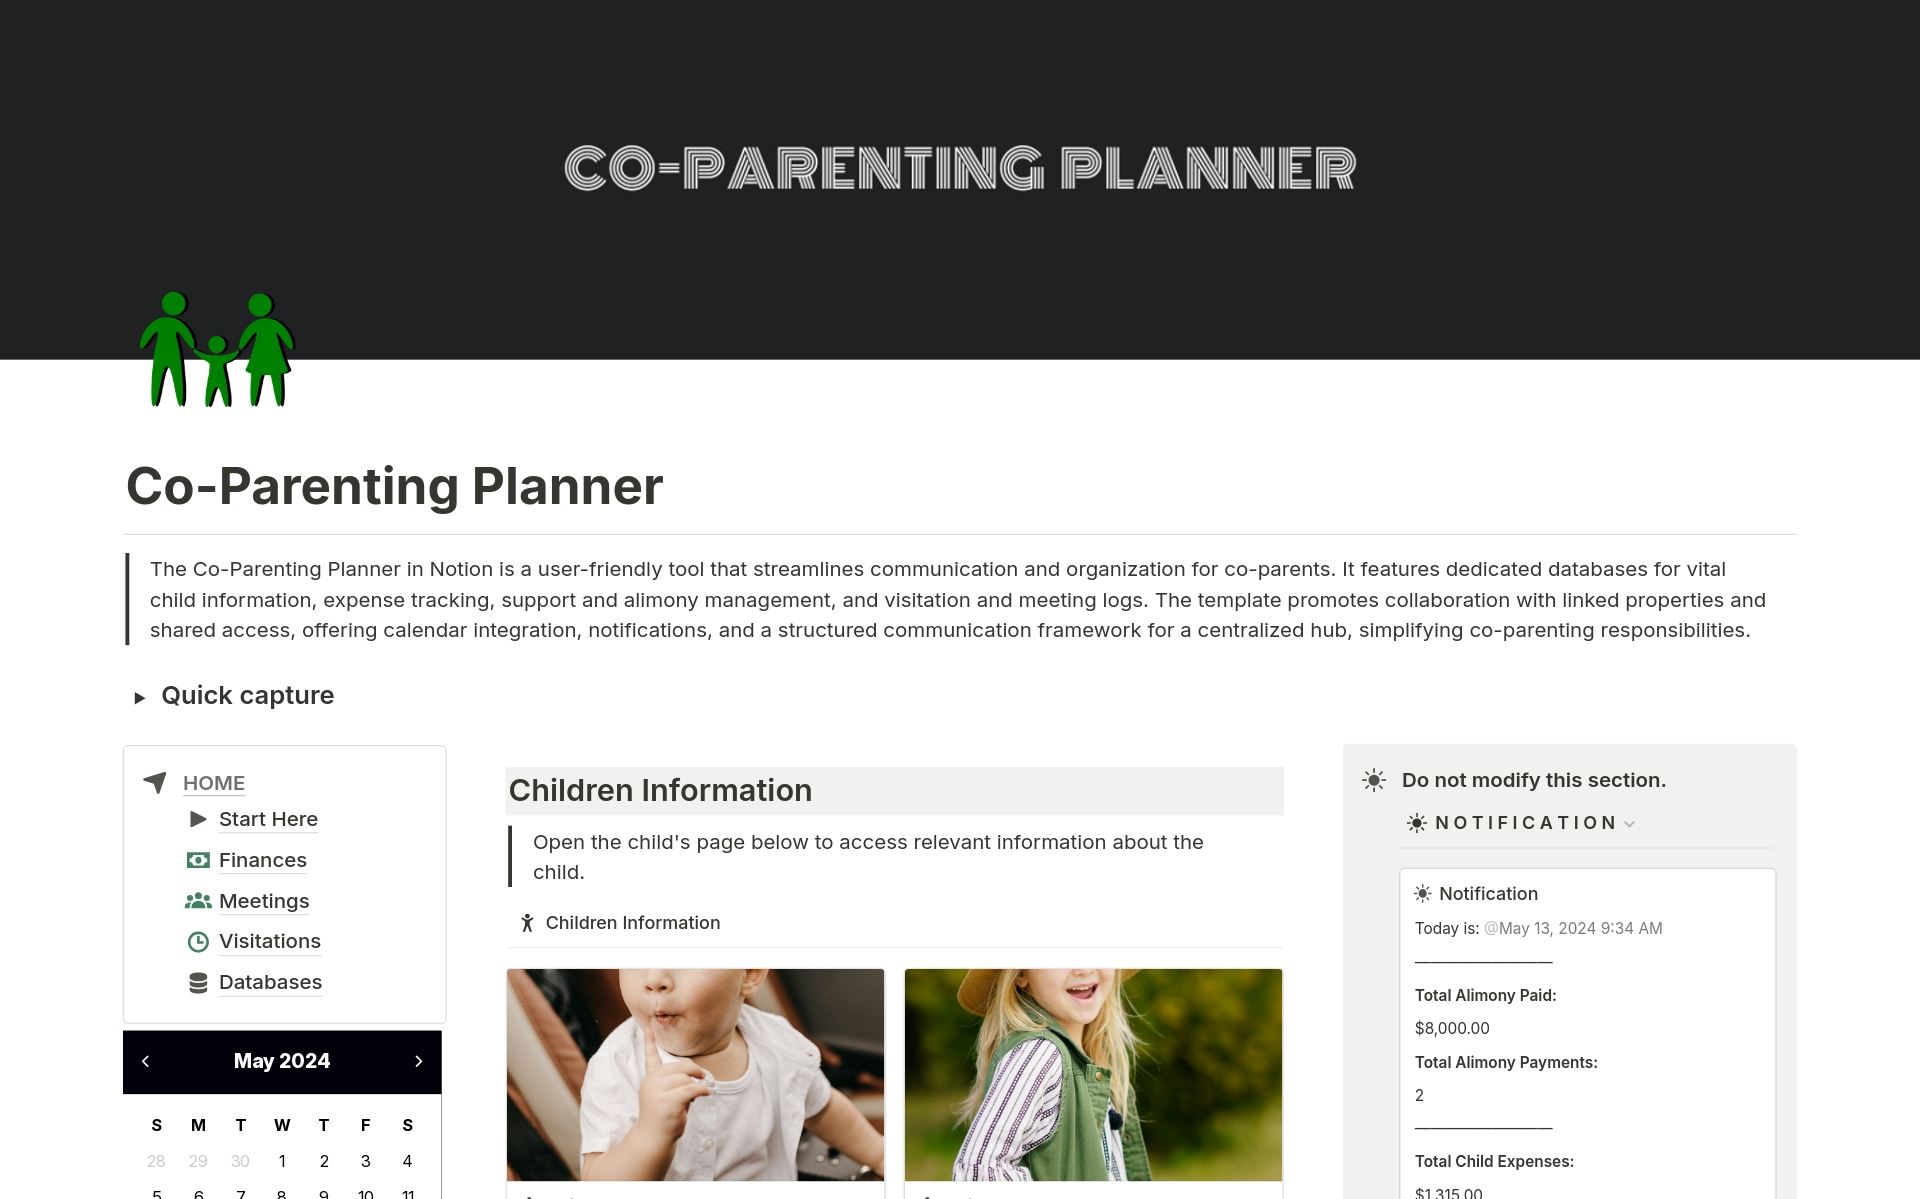 Co-Parenting Planner, the ultimate solution for co-parents seeking enhanced organization and communication in shared responsibilities. 